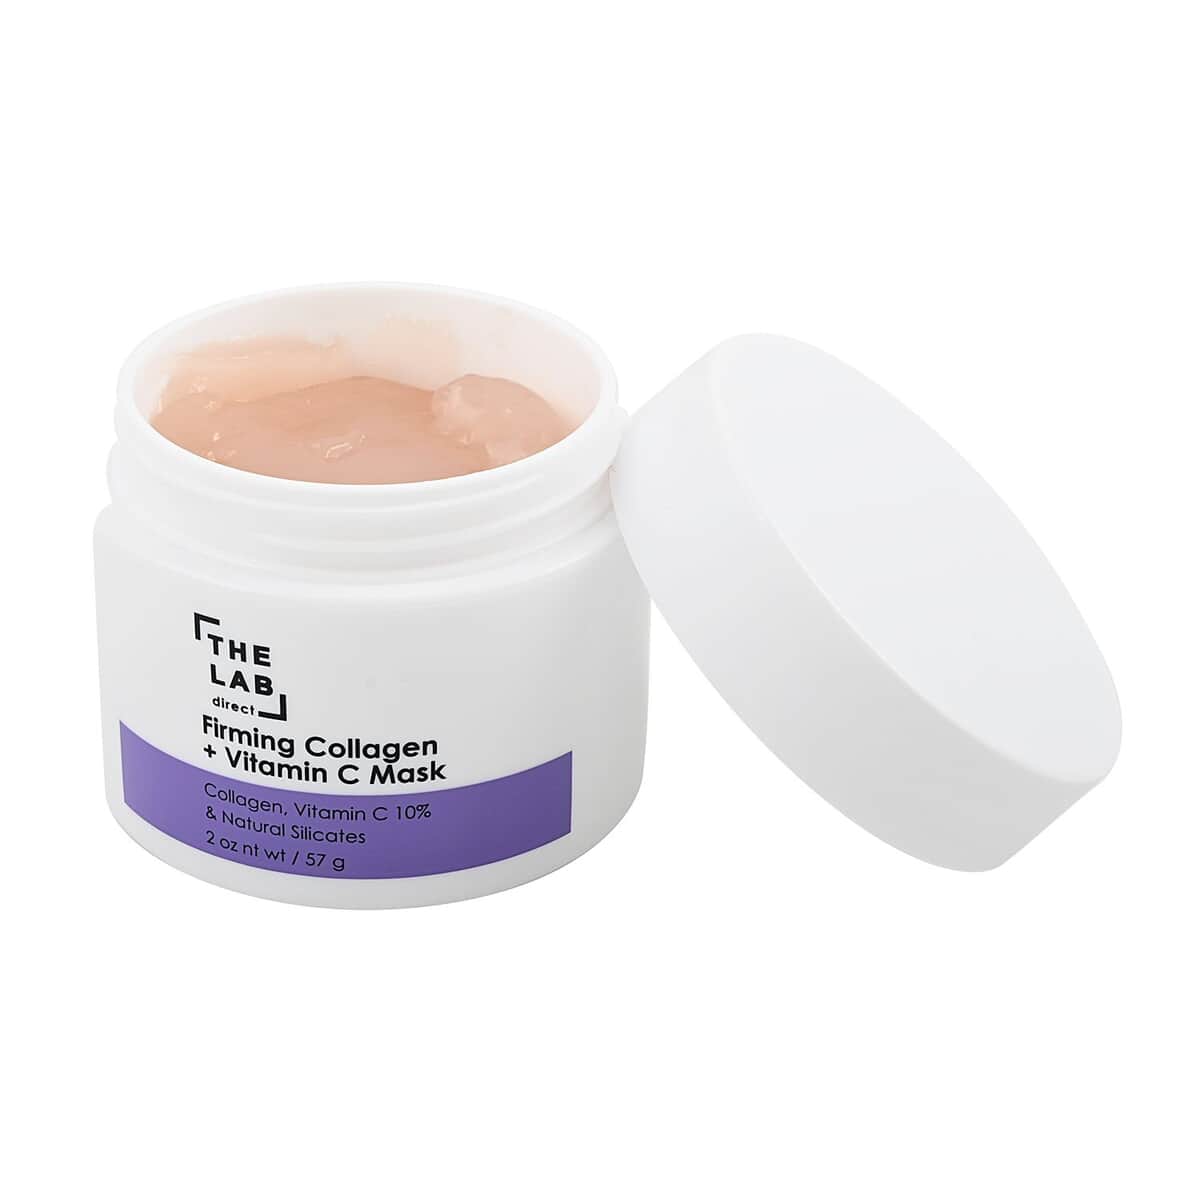 The Lab Direct Firming Collagen and Vitamin C Mask (2oz) image number 1